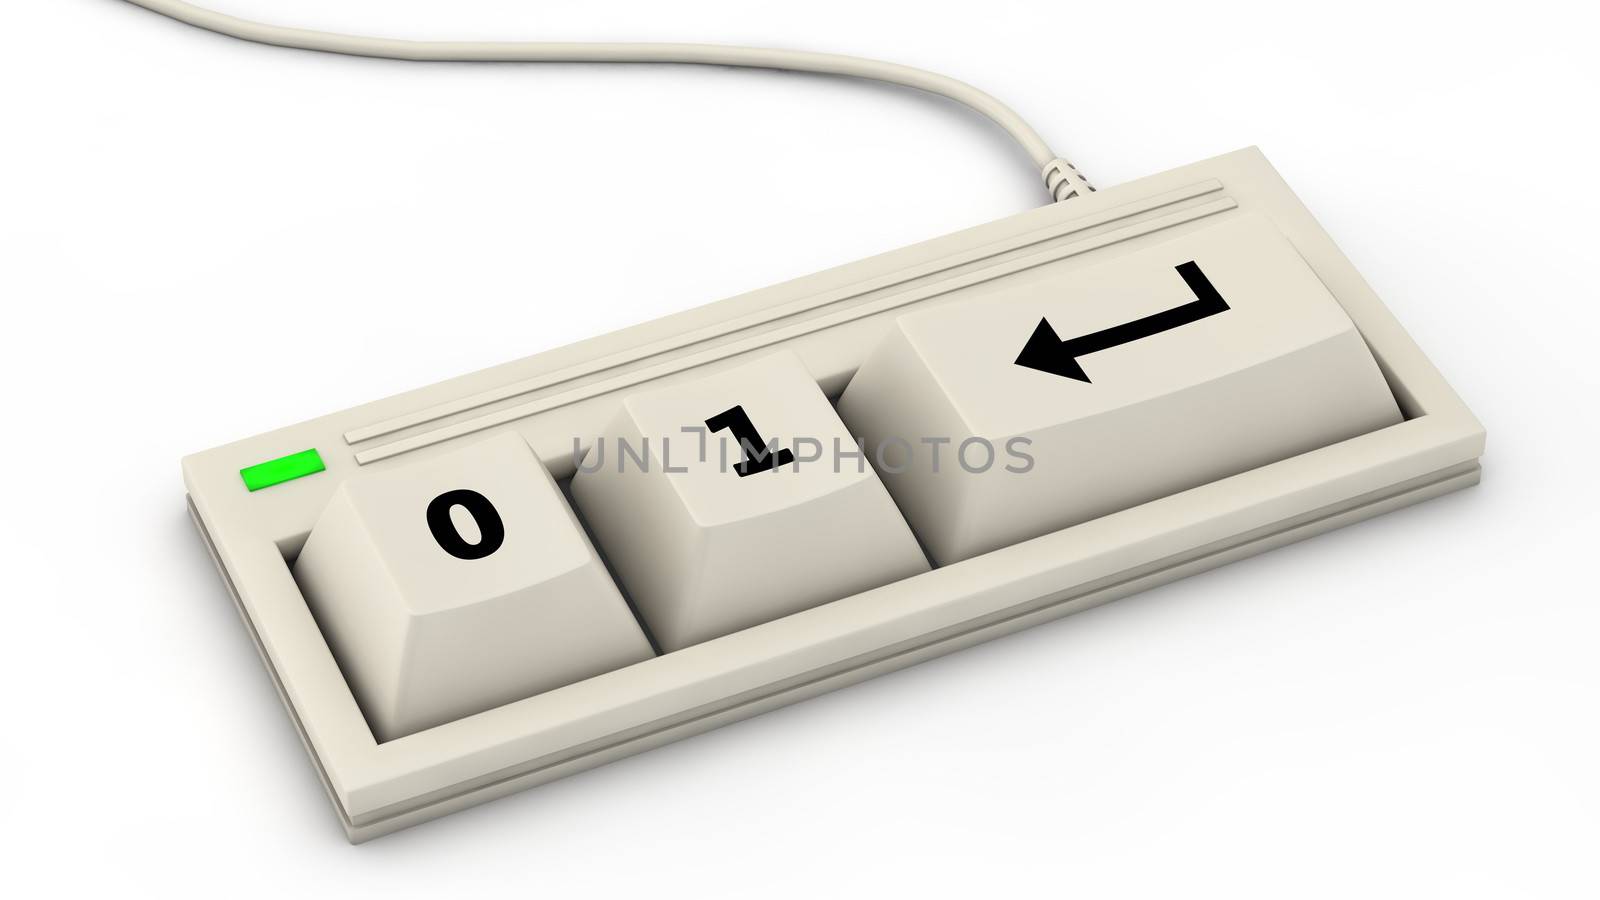 computer keyboard with reduced layout for binary input - 0, 1, Enter, Return